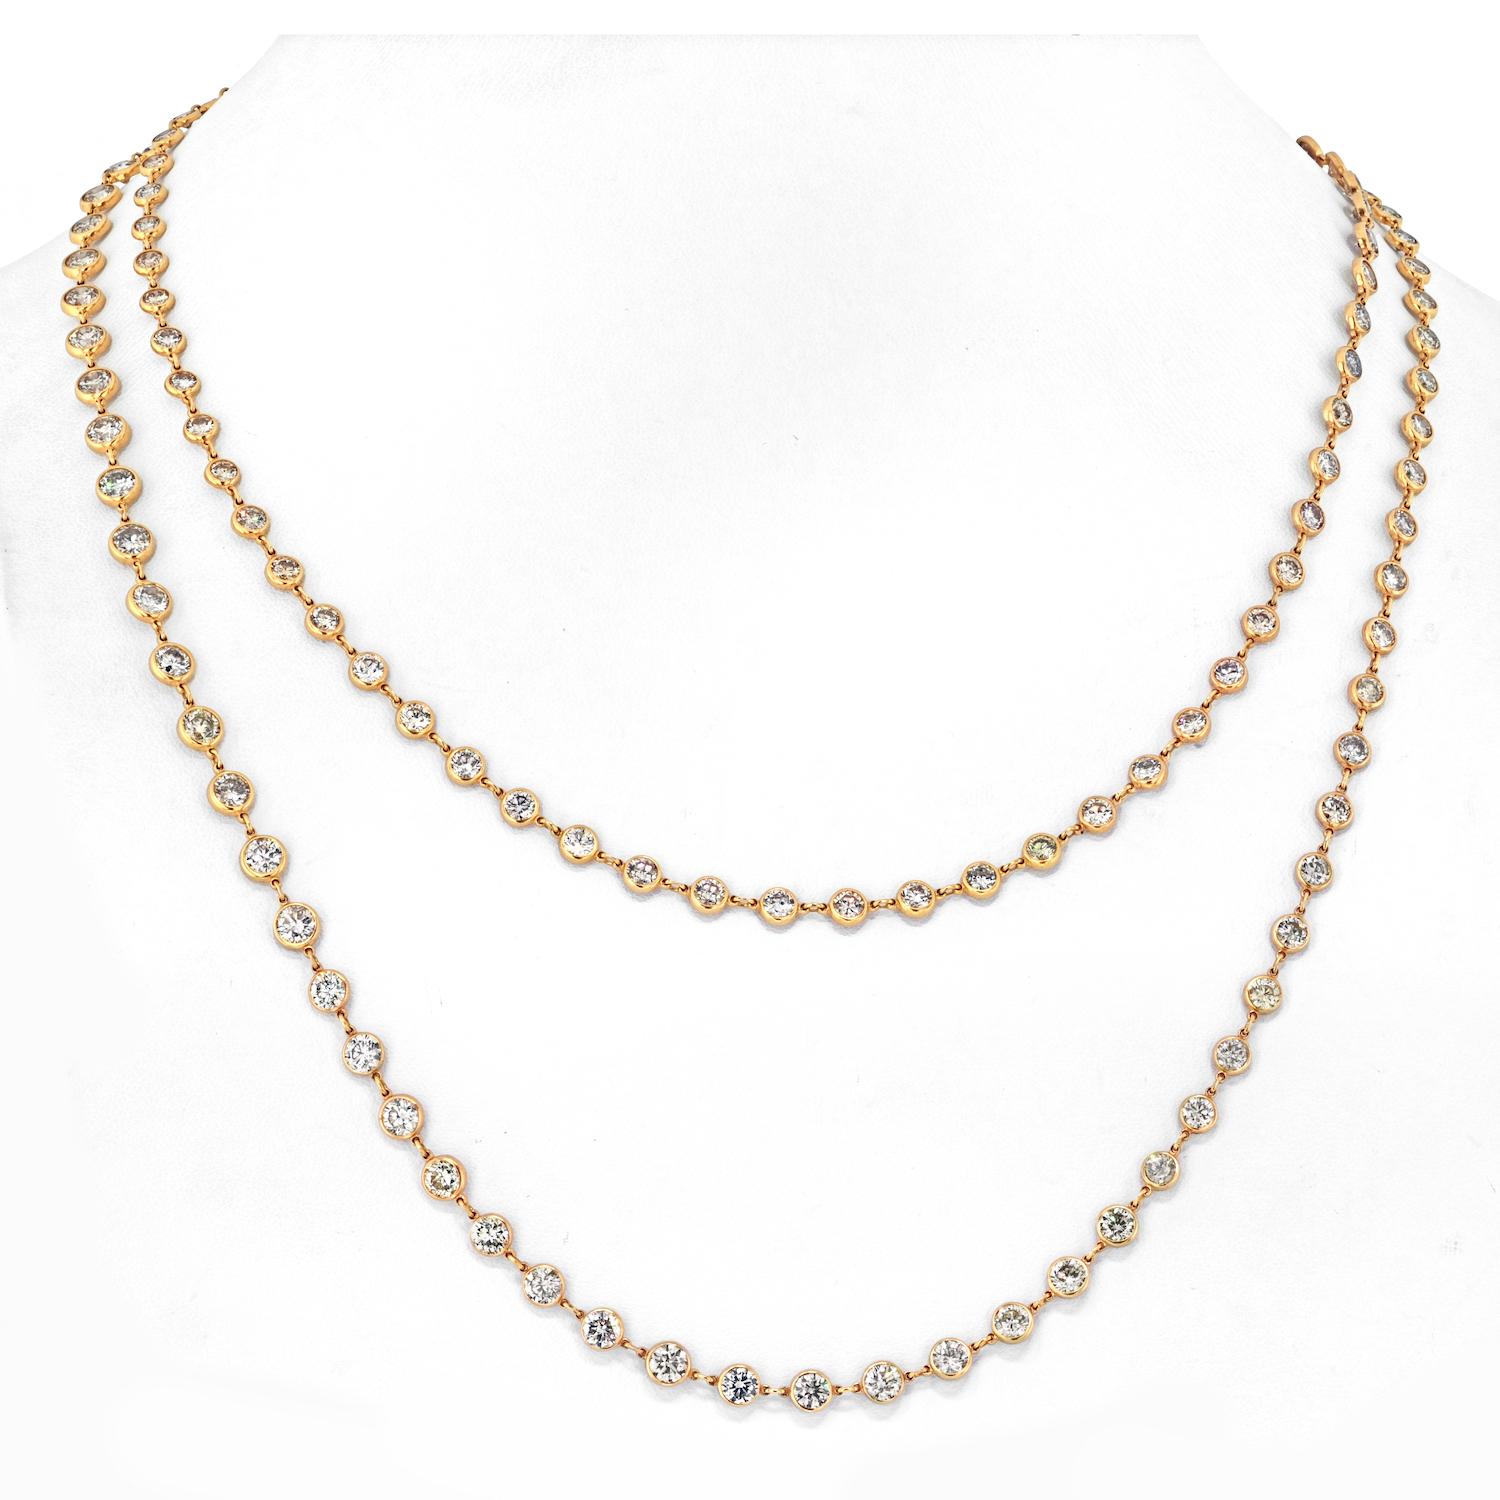 34 cttw 18K Yellow Gold Round Diamond By The Yard 43 Inches Chain Necklace